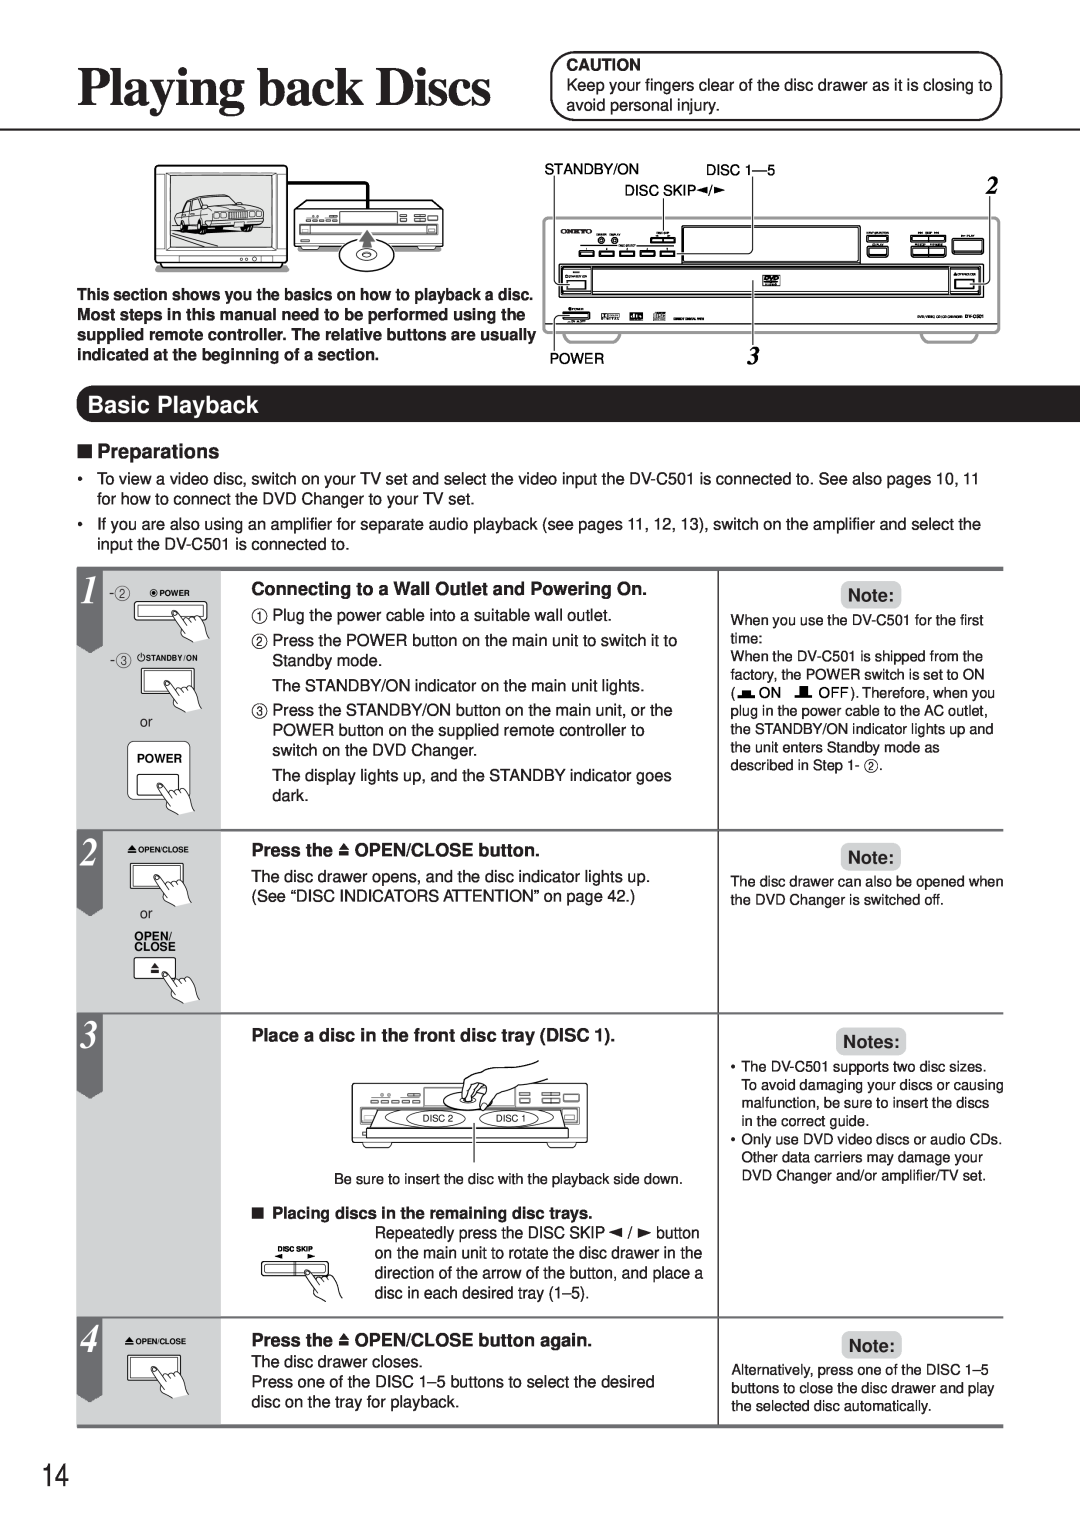 Onkyo DV-C501 instruction manual Preparations, Connecting to a Wall Outlet and Powering On, Press the OPEN/CLOSE button 